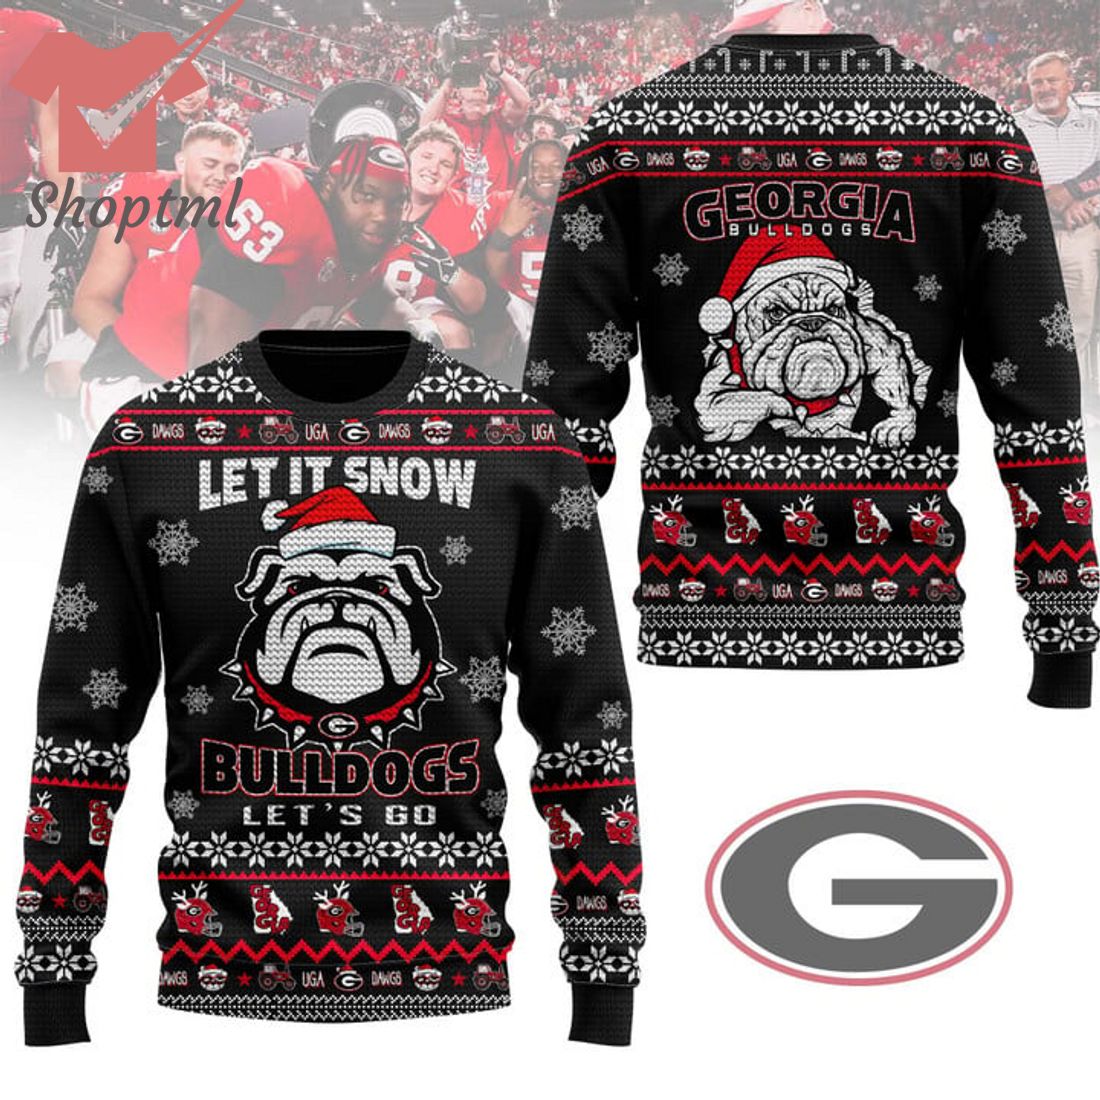 Georgia Bulldogs Let It Snow Let's Go Ugly Christmas Sweater